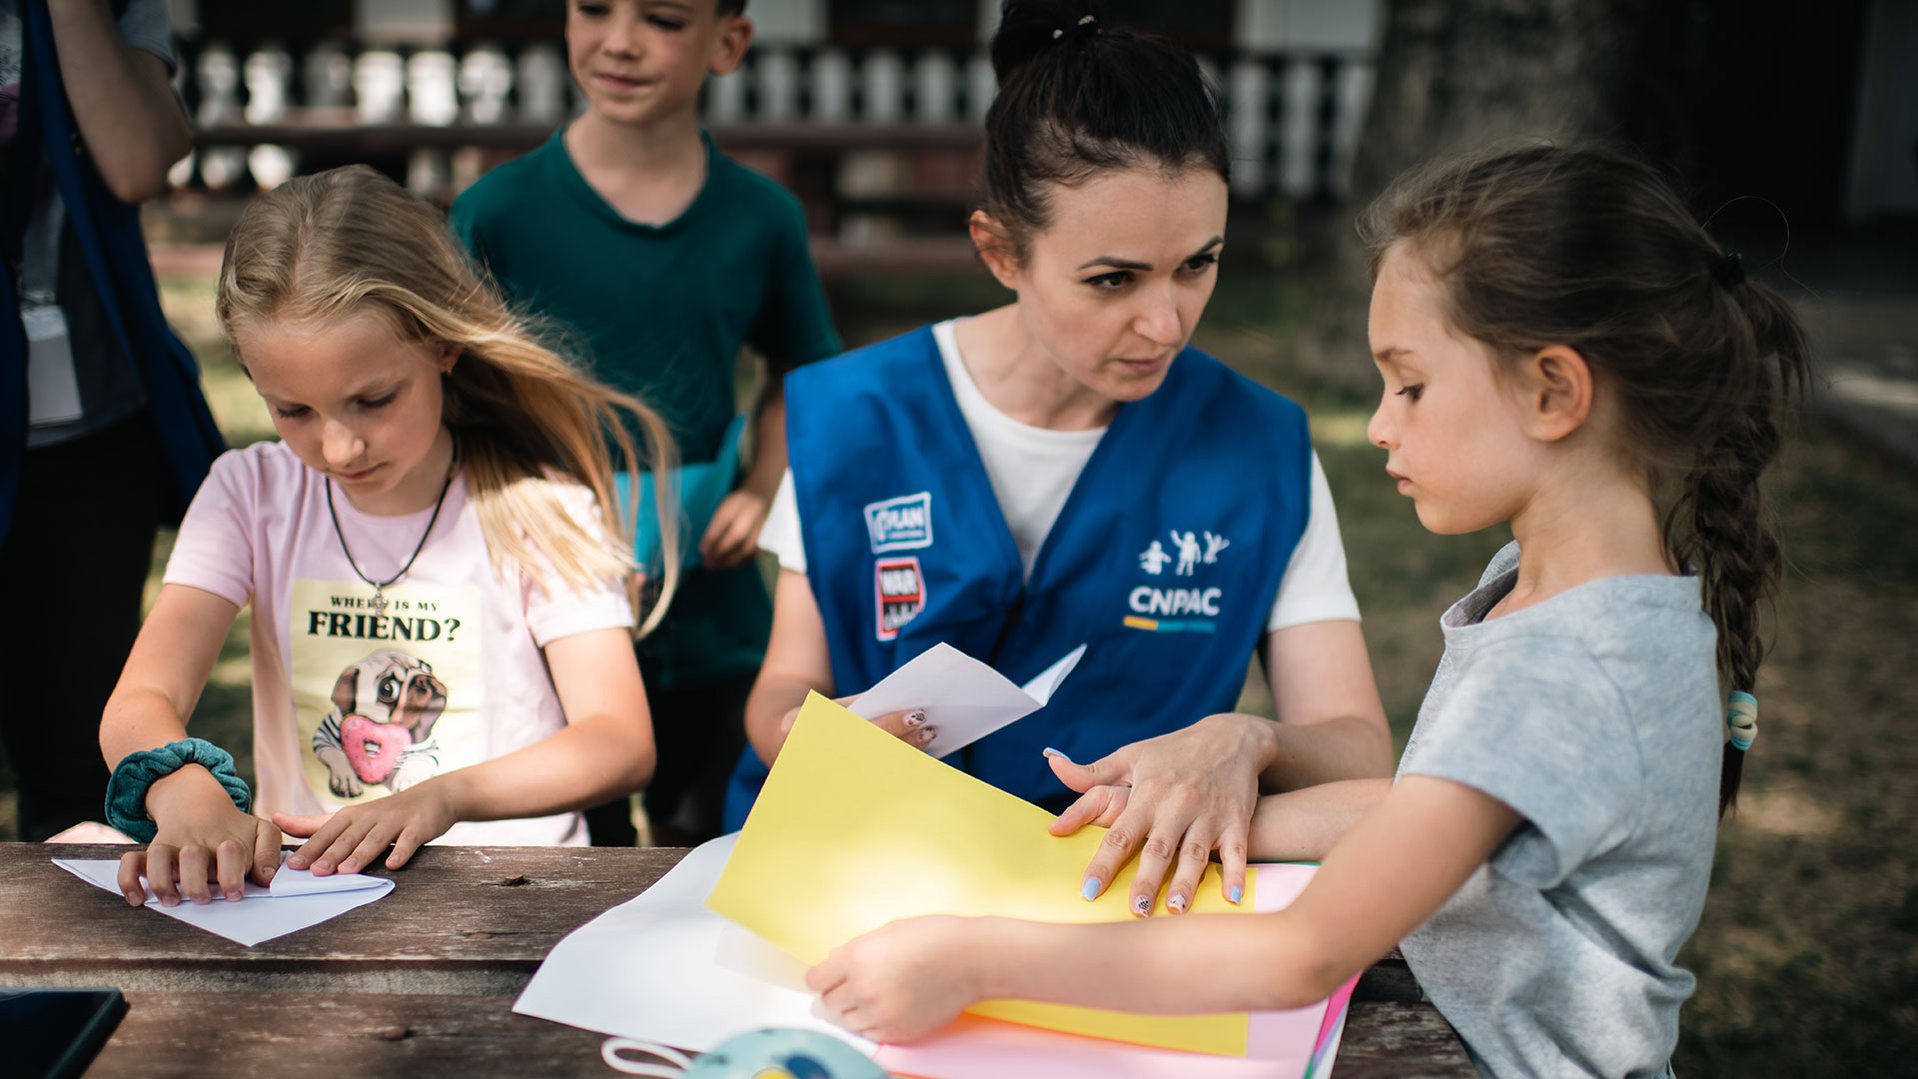 War Child facilitators offer support and a welcome distraction from the war in Ukraine for refugee children